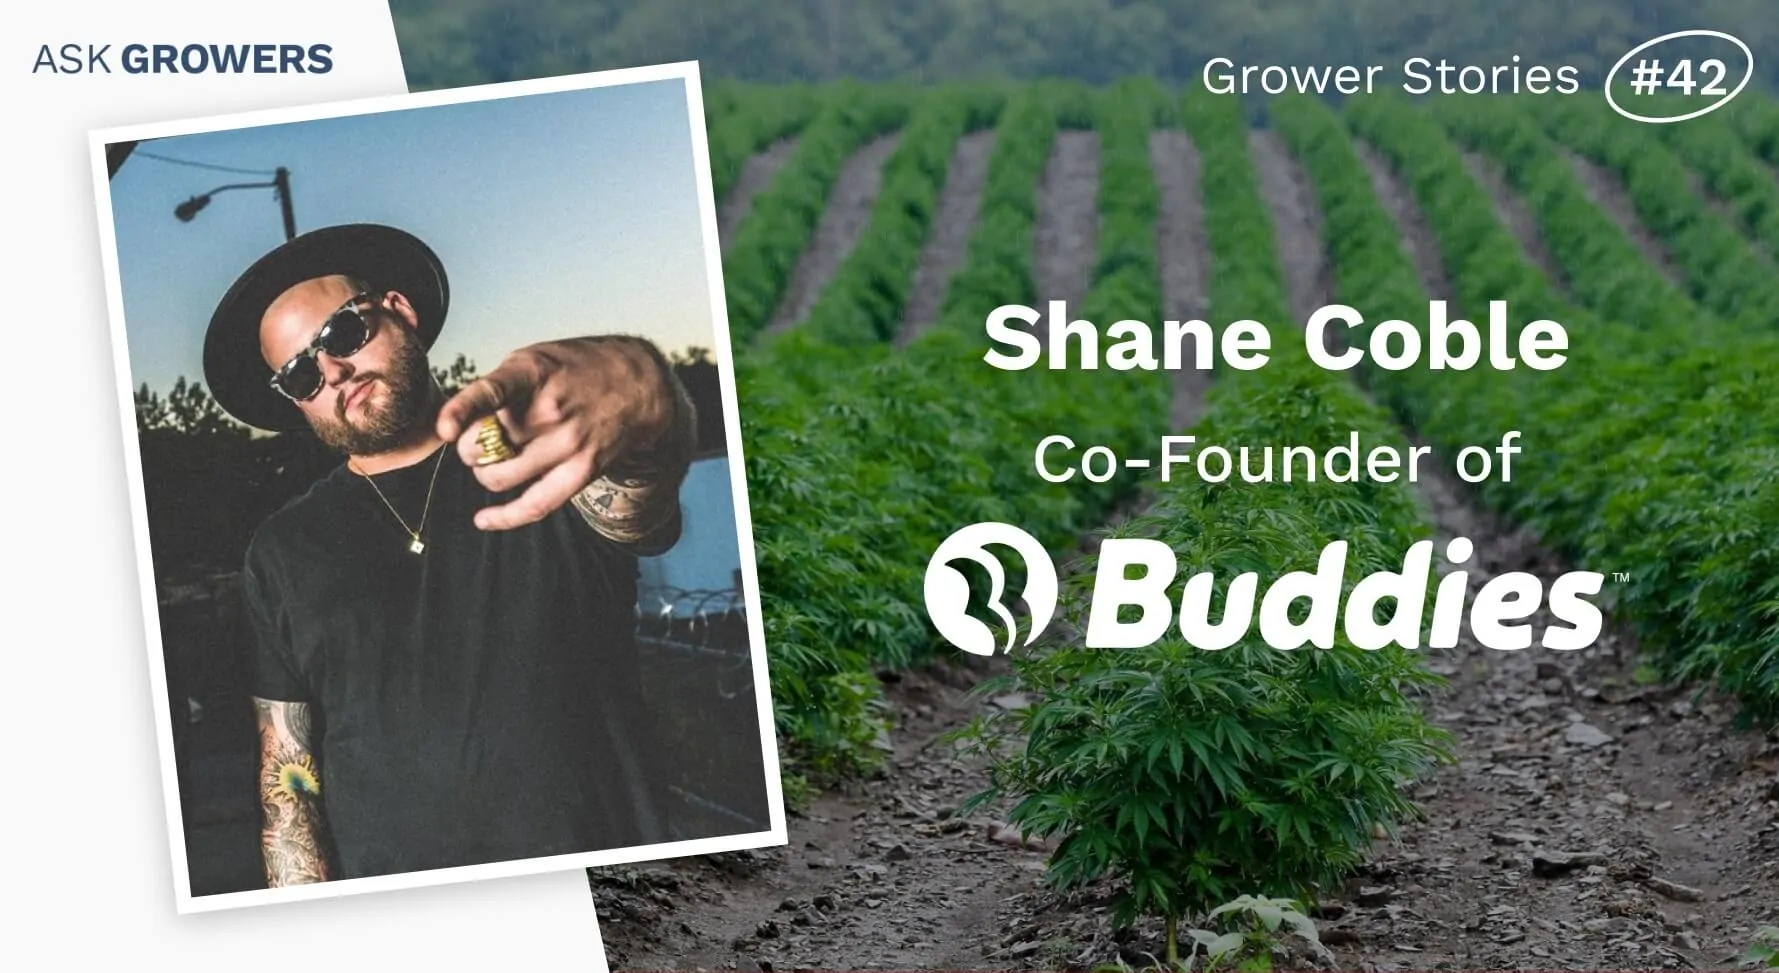 Grower Stories #42: Shane Coble